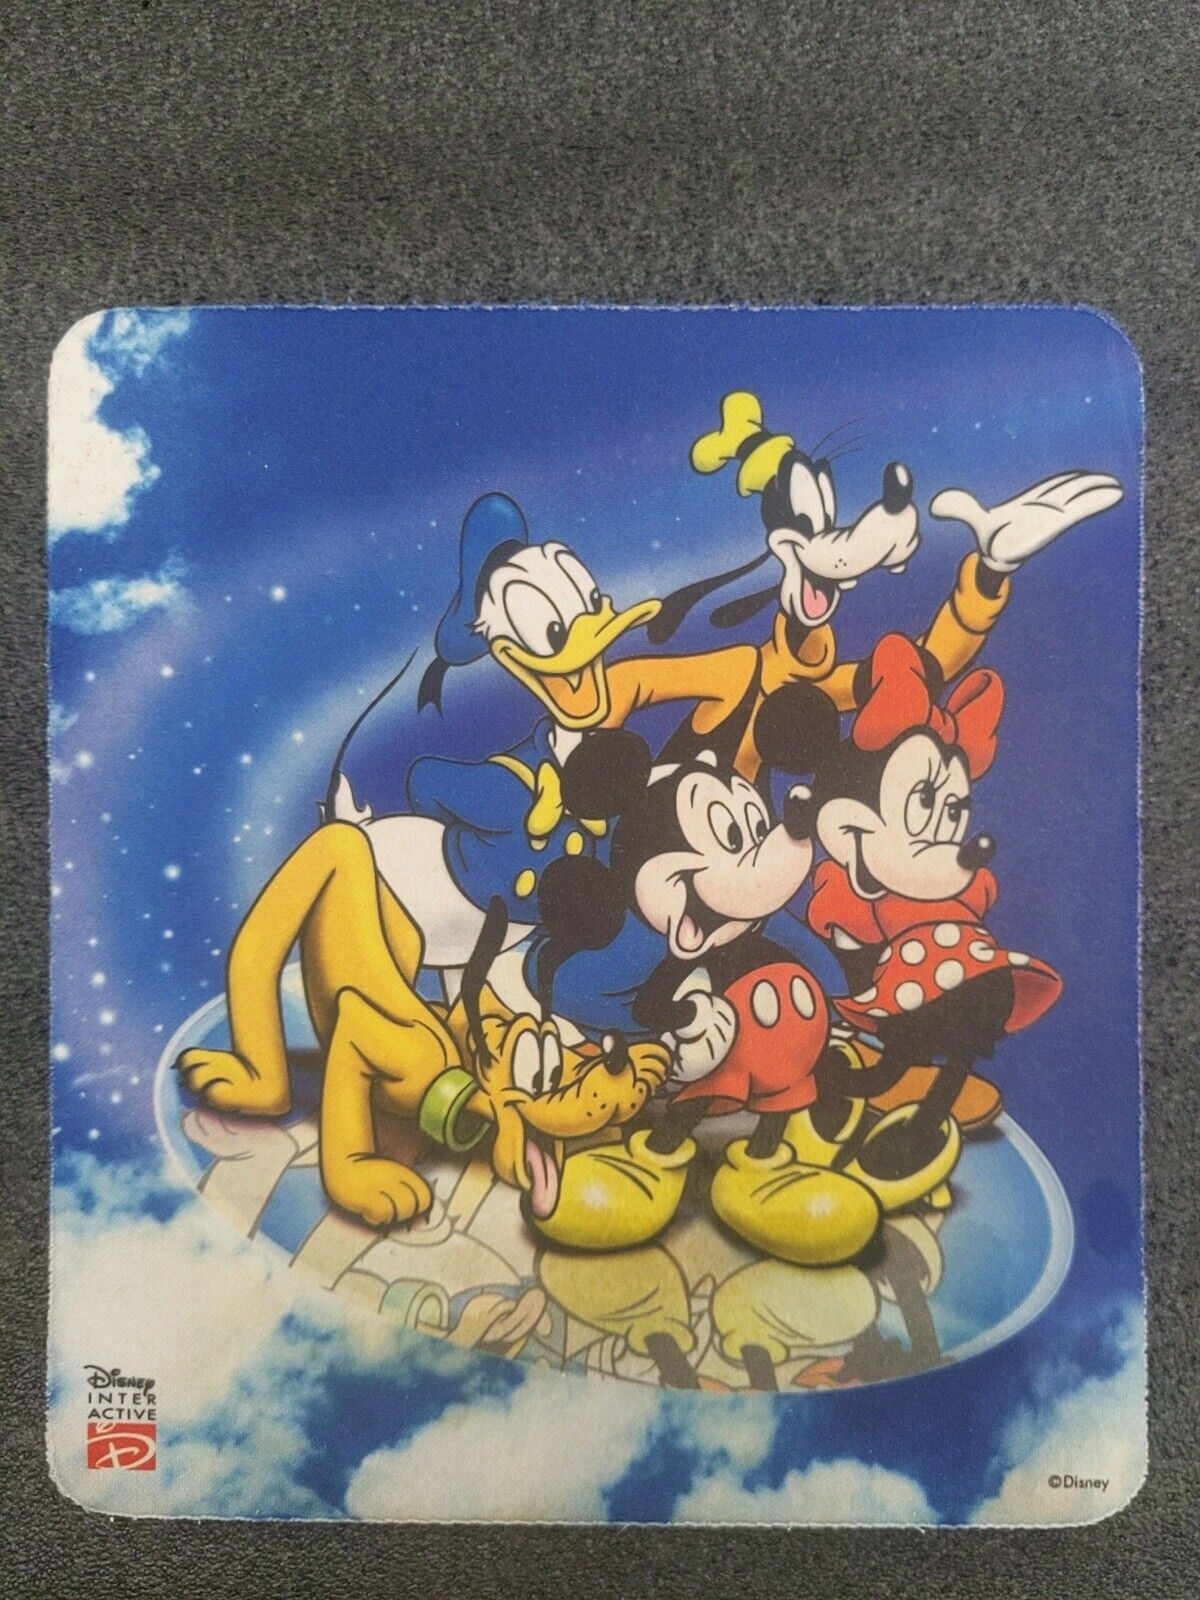 Mickey Minnie Mouse Pluto Goofy Donald Duck Disney Pad Mousepad Rubber Vintage